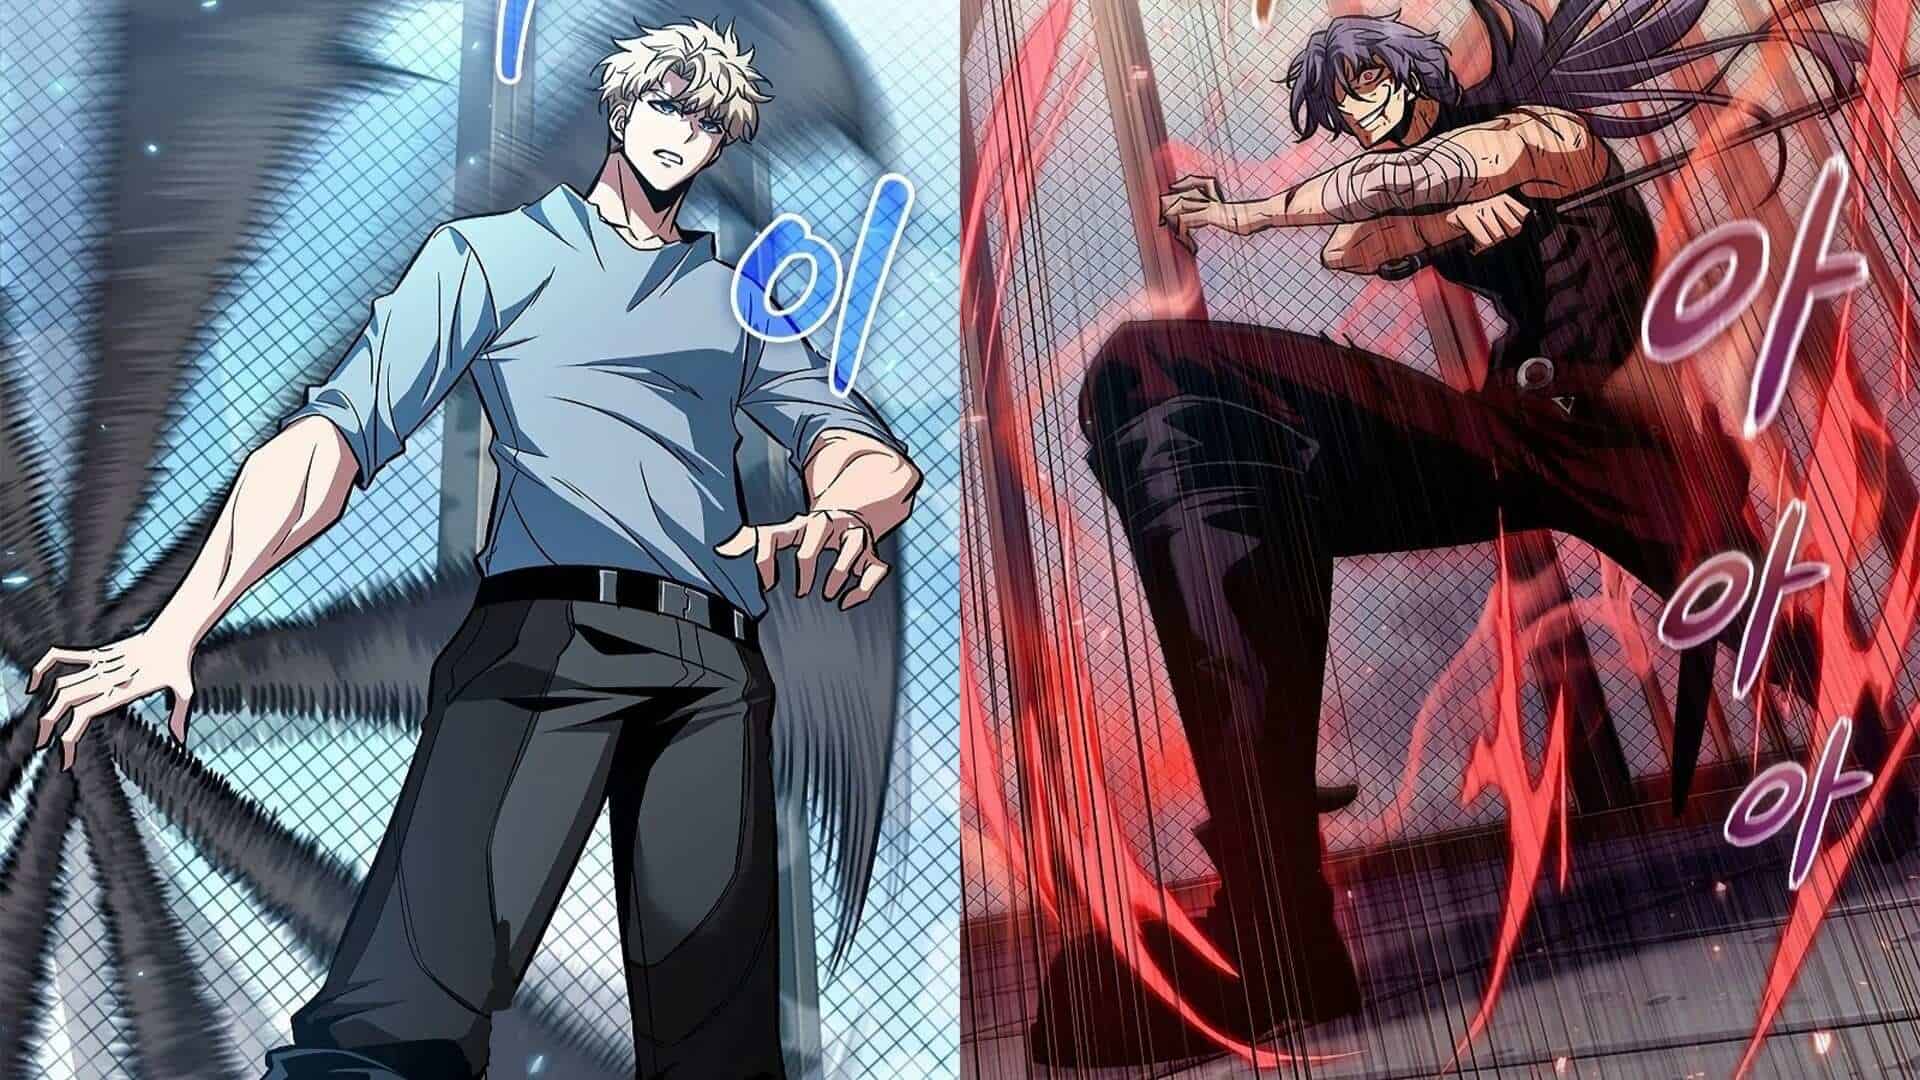 Aaron (Left) And Velkist (Right) About To Go All Out In Their Duel To Determine Who Is To Be Included In Party 1 - Pick Me Up, Infinite Gacha Chapter 63